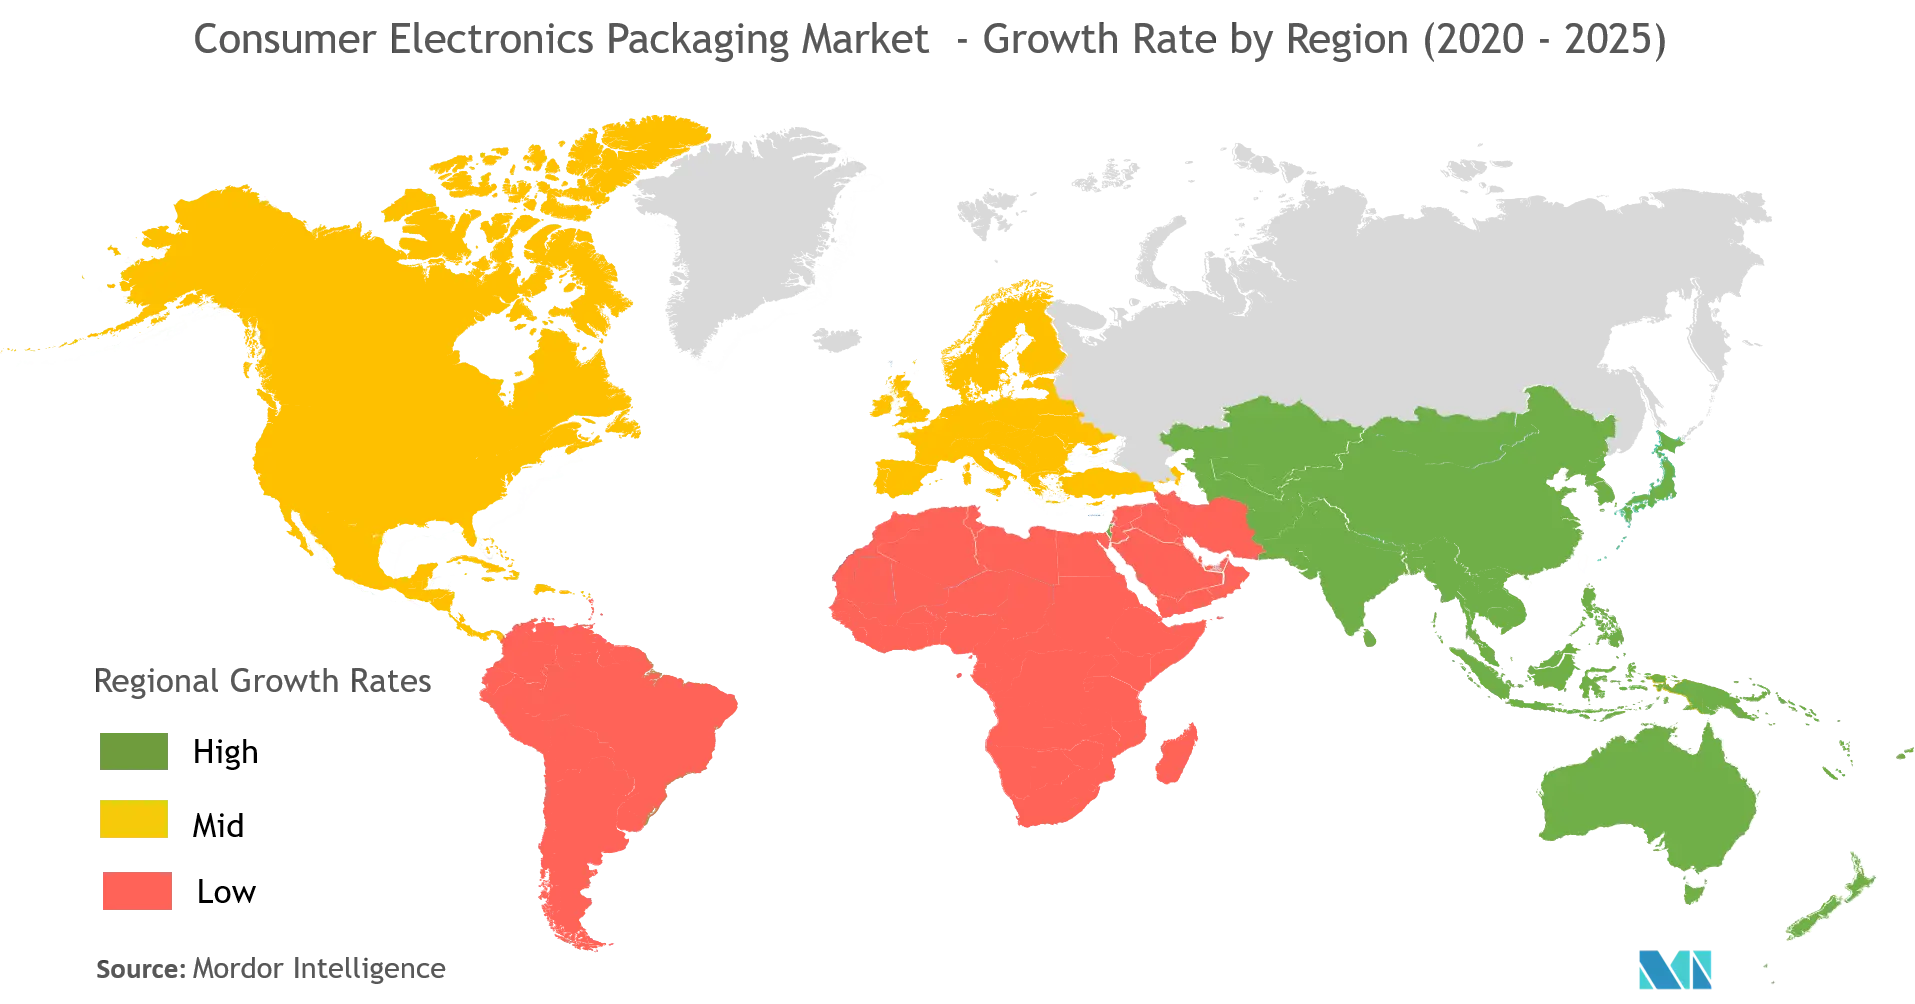 consumer electronics packaging market growth	